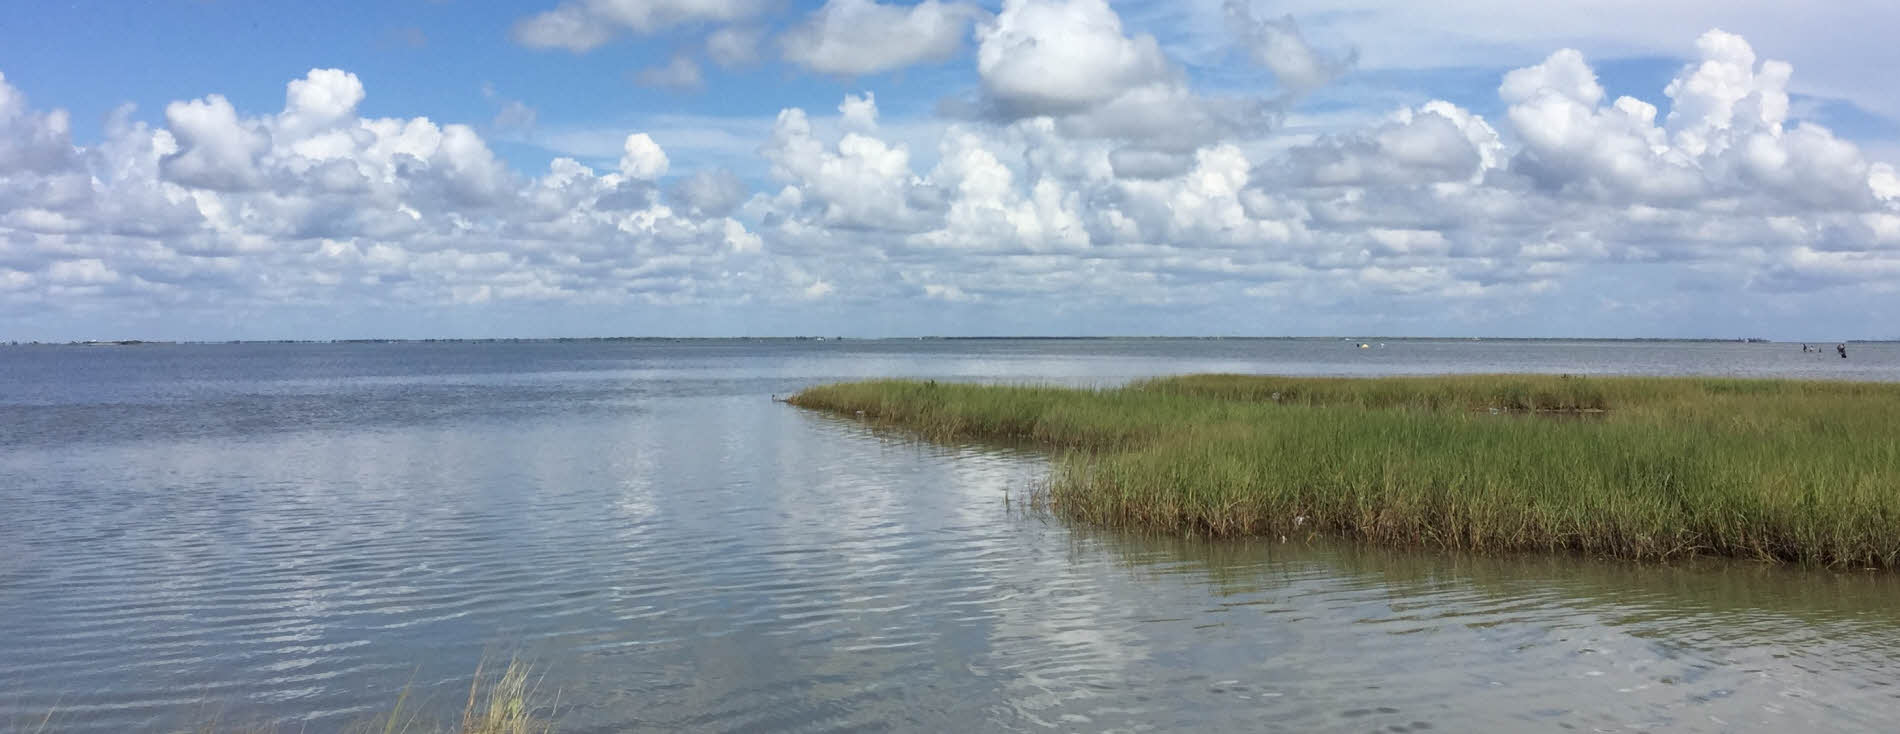 Image of marsh with water, grasses, and clouds against blue sky.